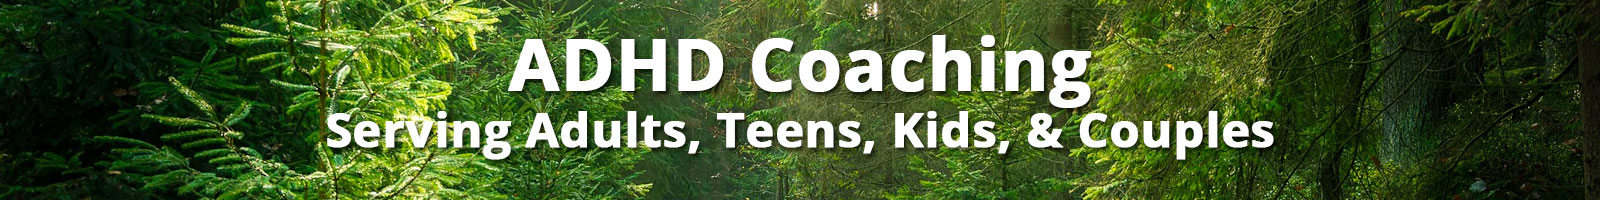 ADHD Coaching Serving Adults, Teens, Kids, & Couples